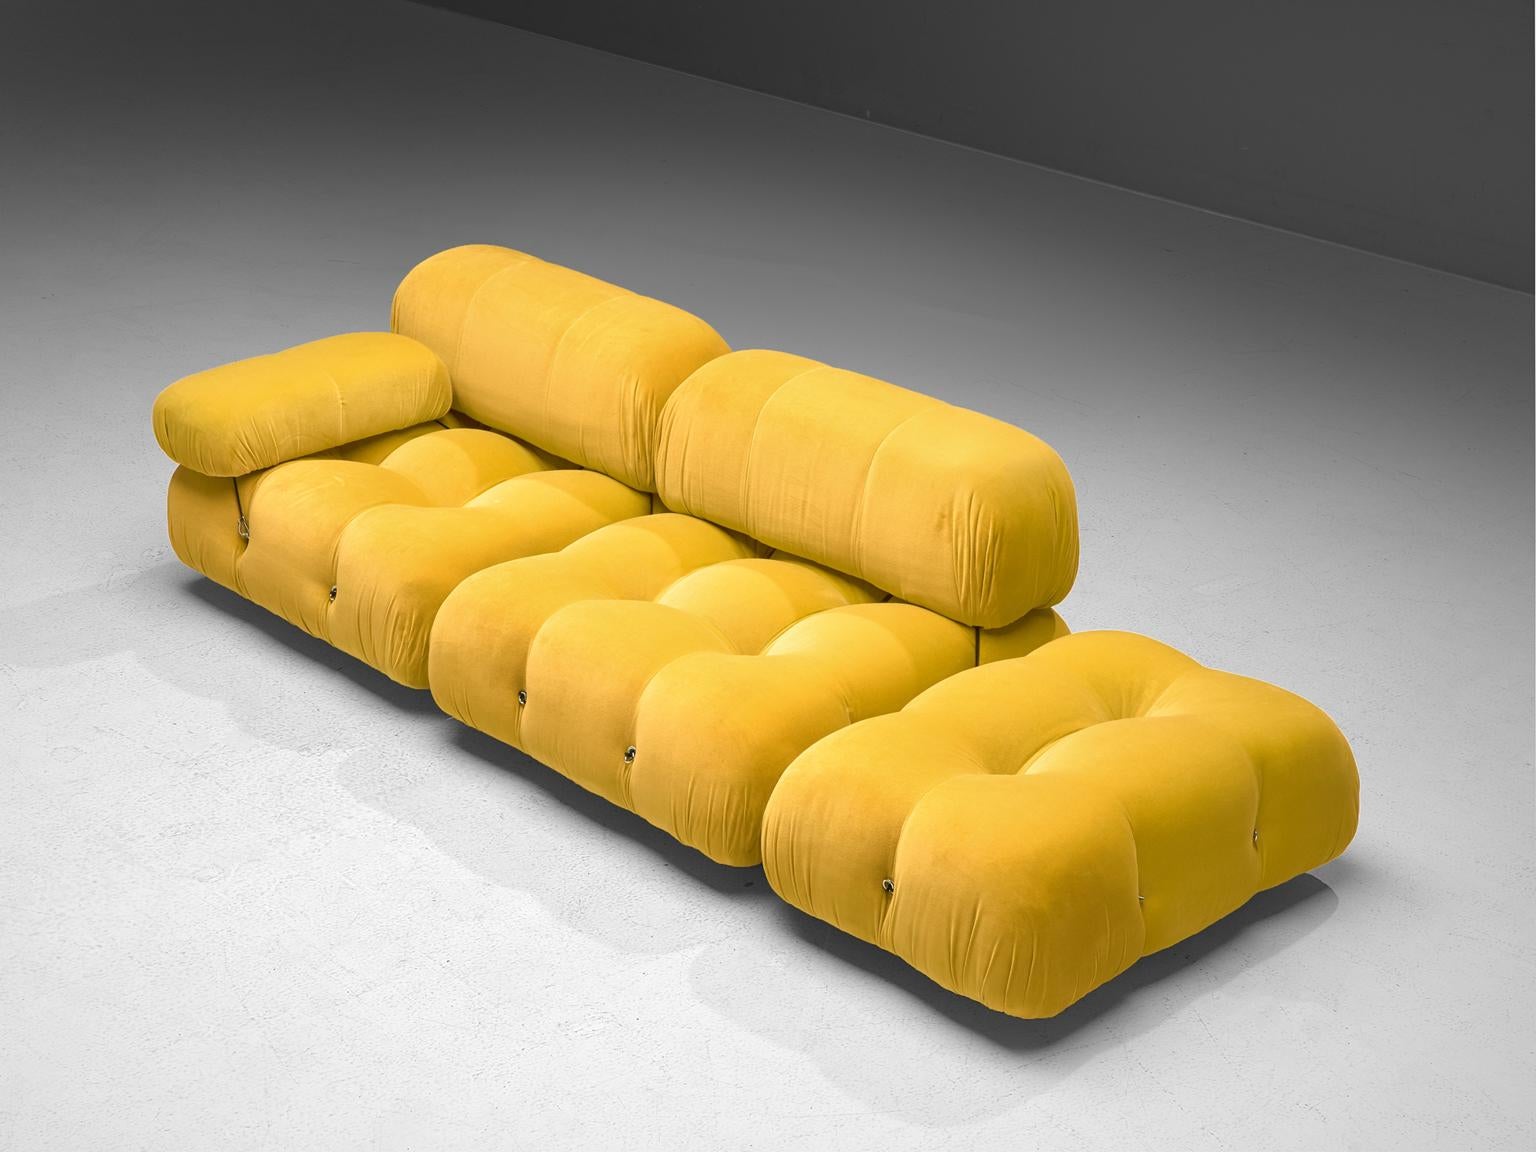 Mario Bellini, modular 'Cameleonda' sofa in yellow velvet, Italy, 1972.

The sectional elements of this sofa can be used freely and apart from one another. The upholstery on this piece features yellow velvet. The backs are provided with rings and